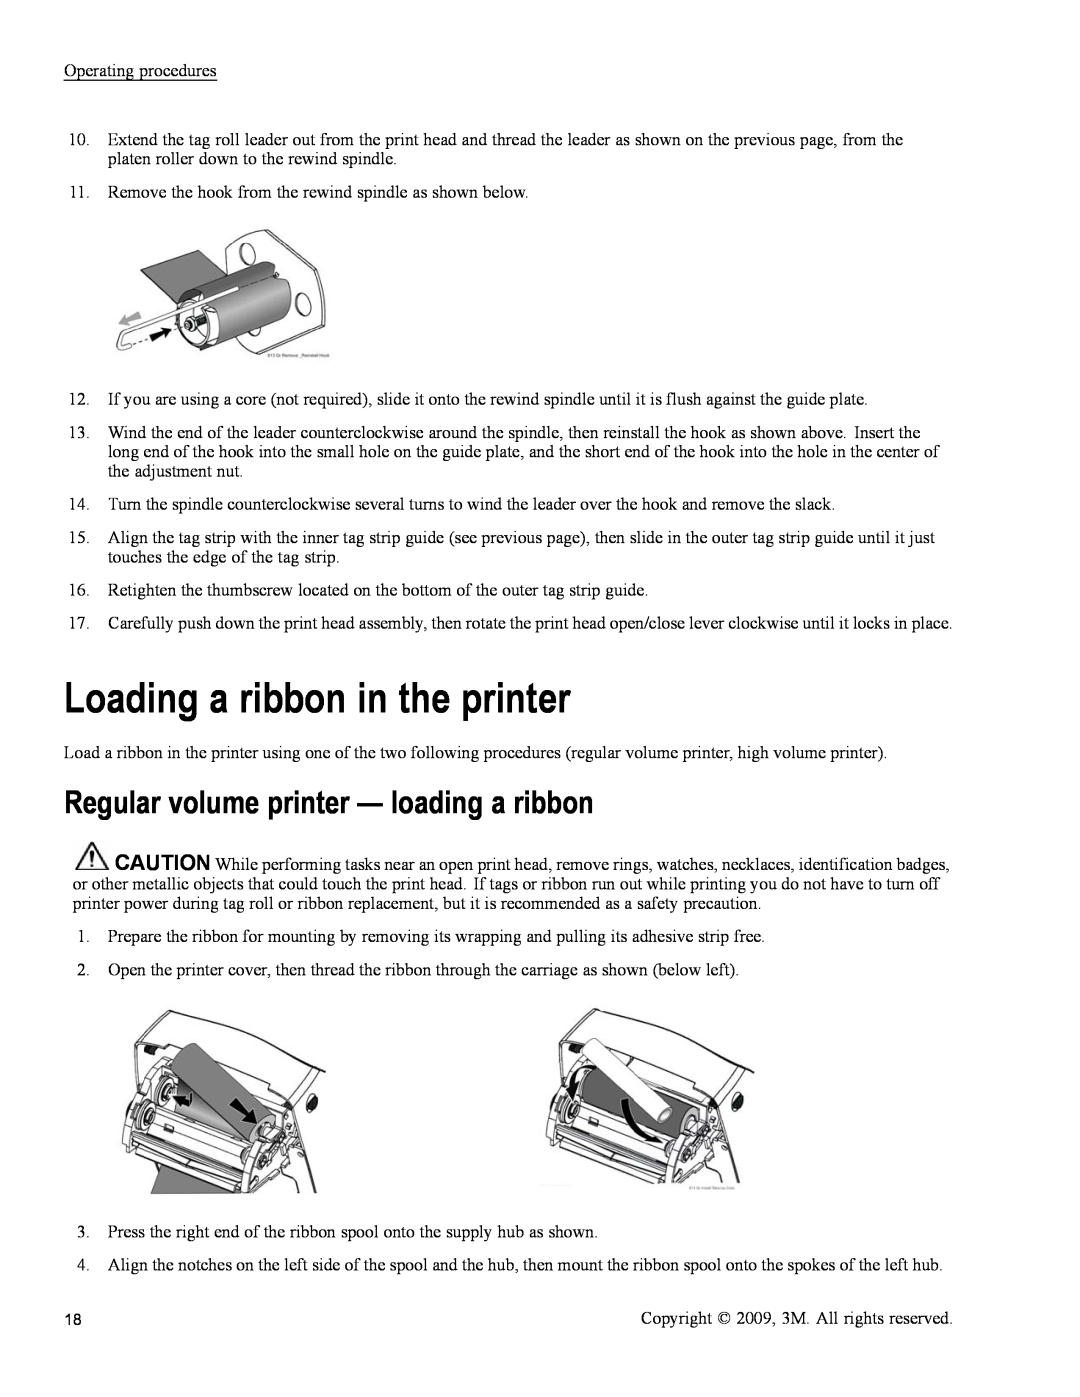 3M 813 owner manual Loading a ribbon in the printer, Regular volume printer - loading a ribbon 